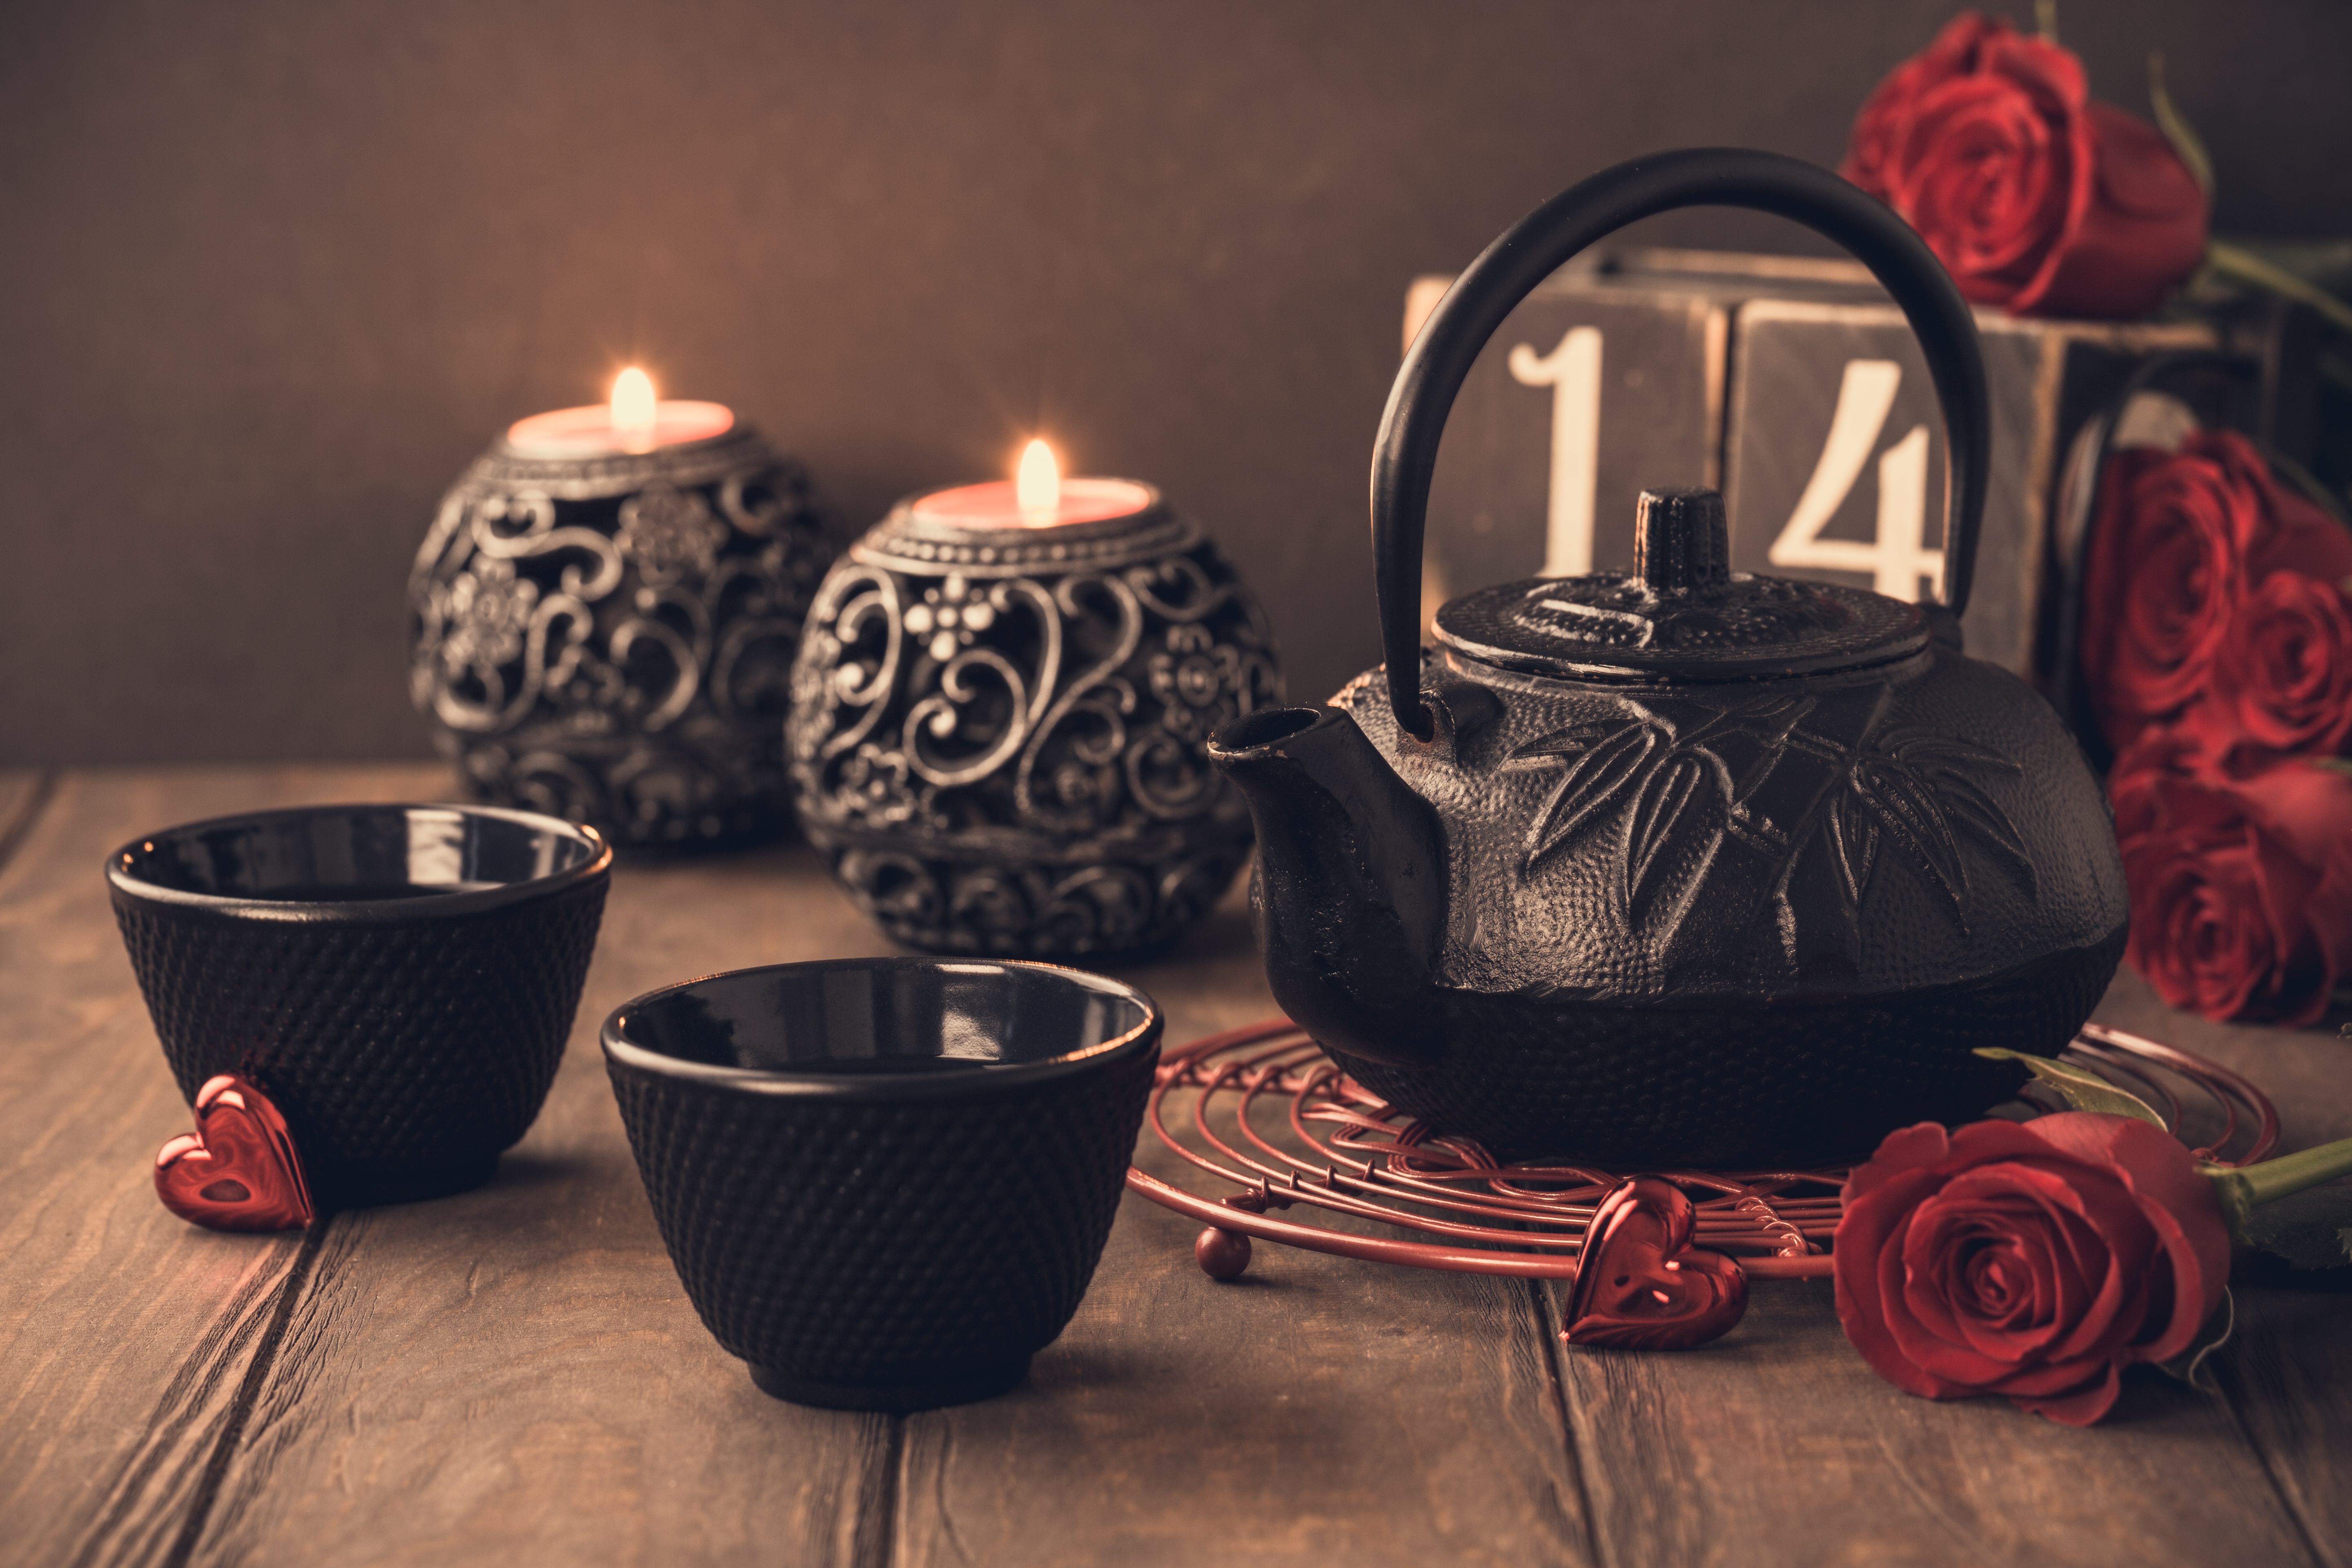 kettle, holiday, valentine's day, candle, cup, red flower, rose, still life